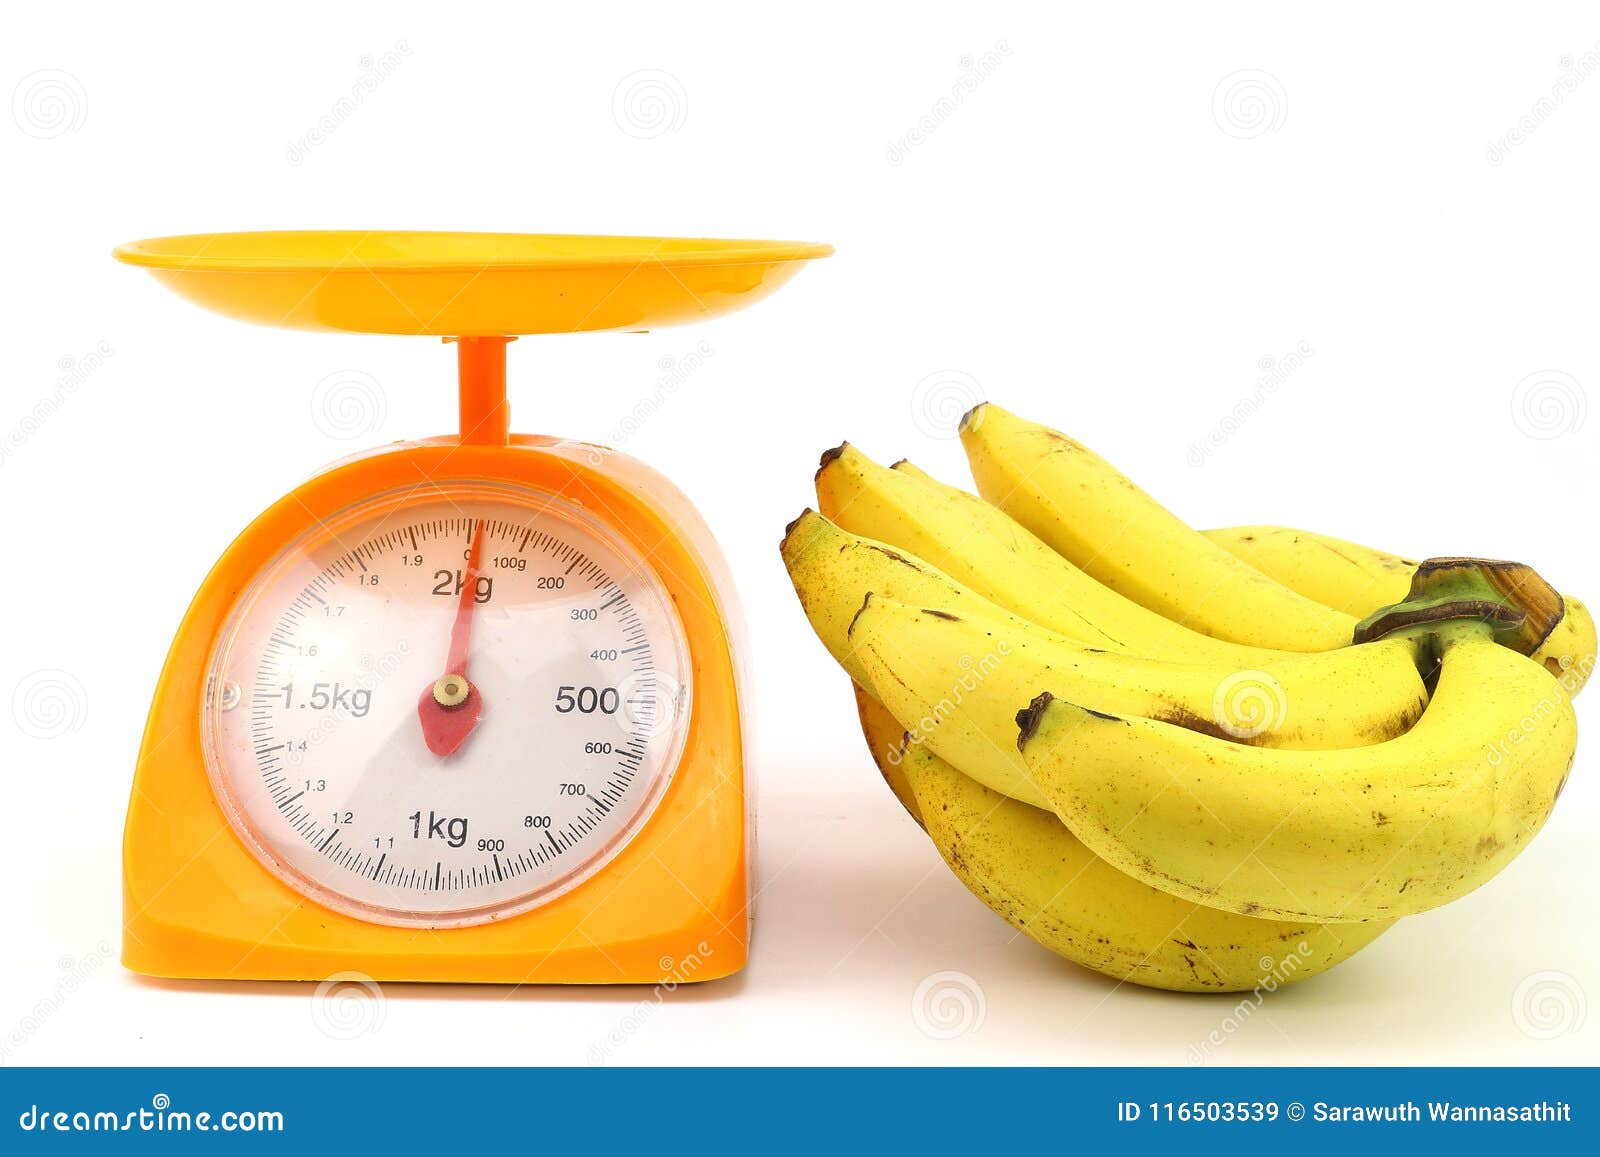 Banana 500gm On Weighing Scale Isolate Stock Vector (Royalty Free)  2312587345